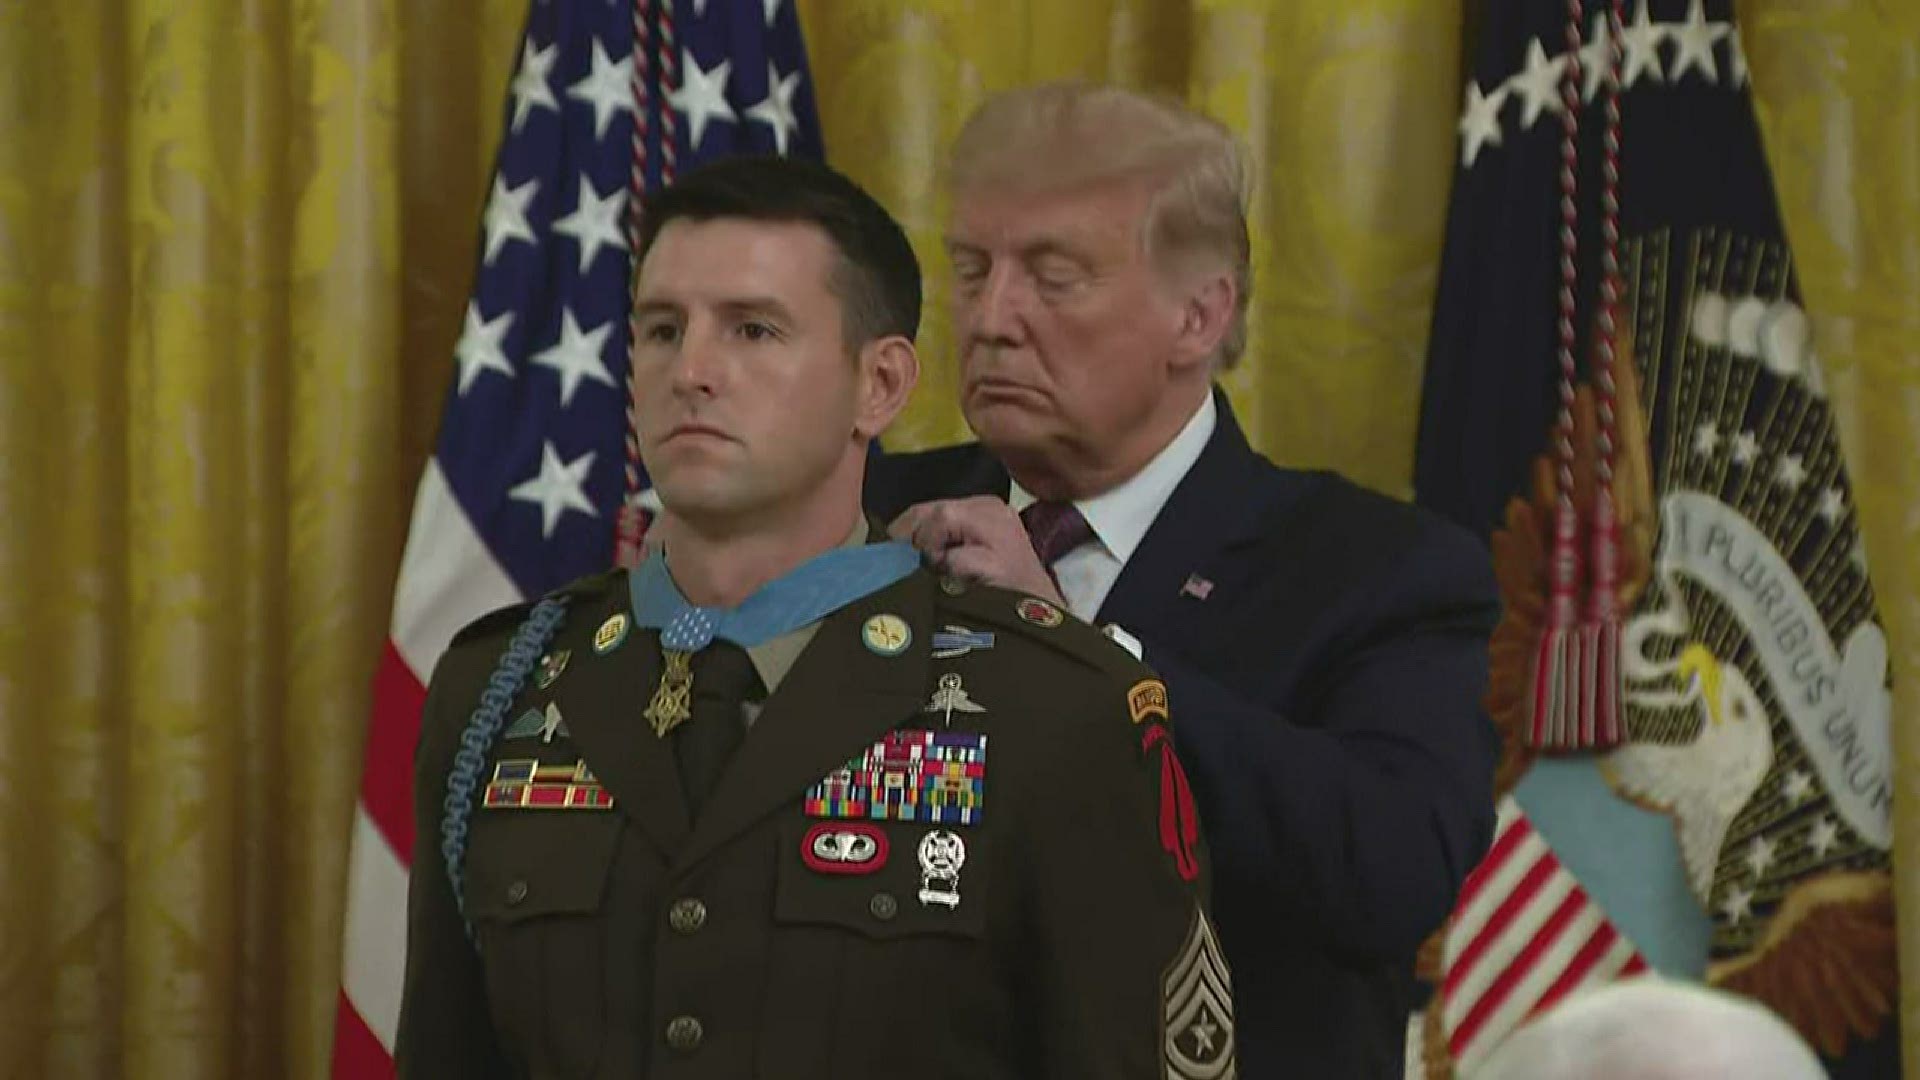 Sgt. Thomas Payne was awarded the Medal of Honor for his actions to rescue hostages in Iraq from ISIS in 2015.